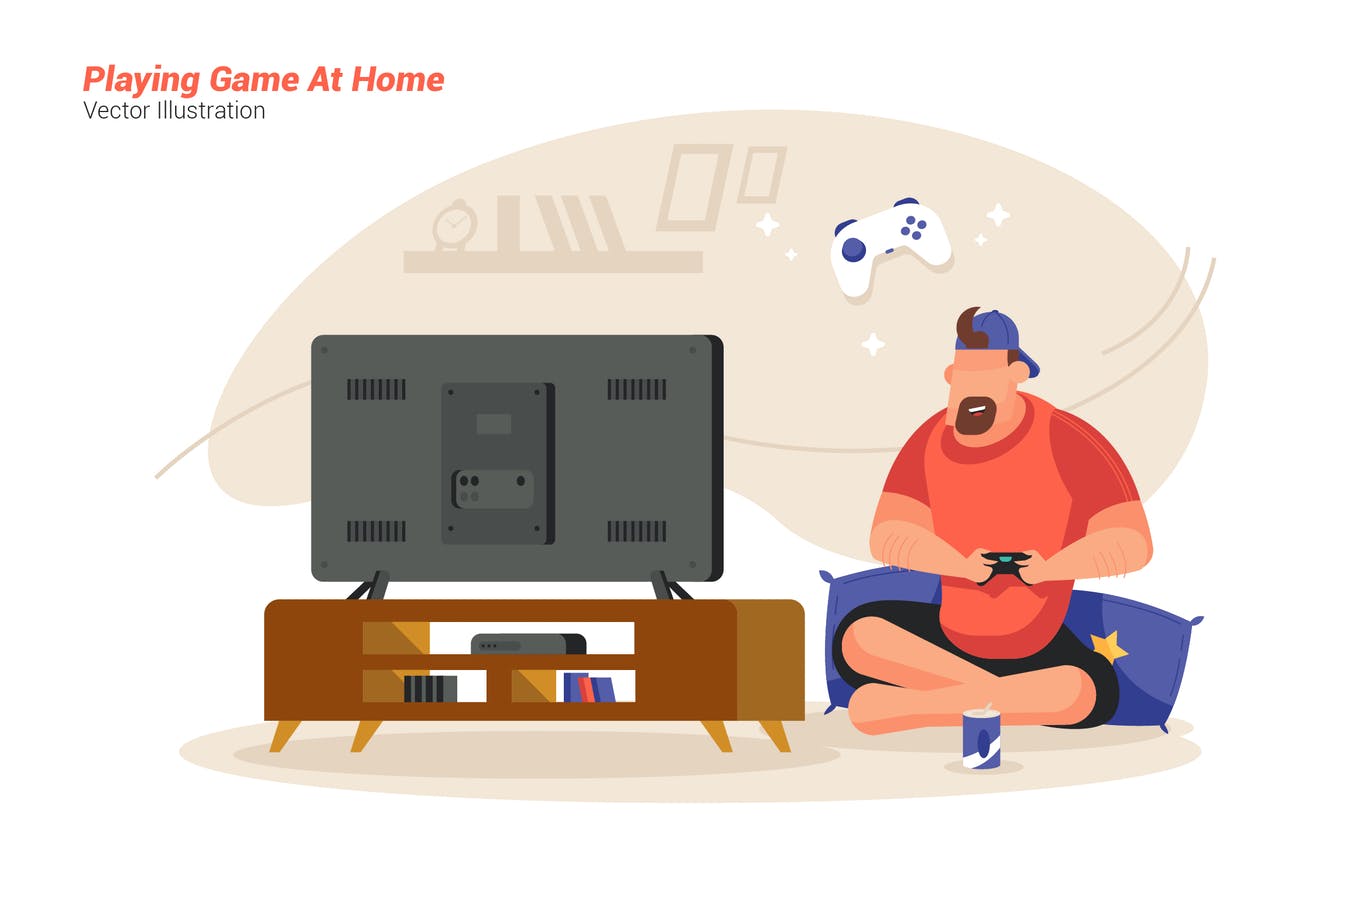 Game At Home - Vector Illustration